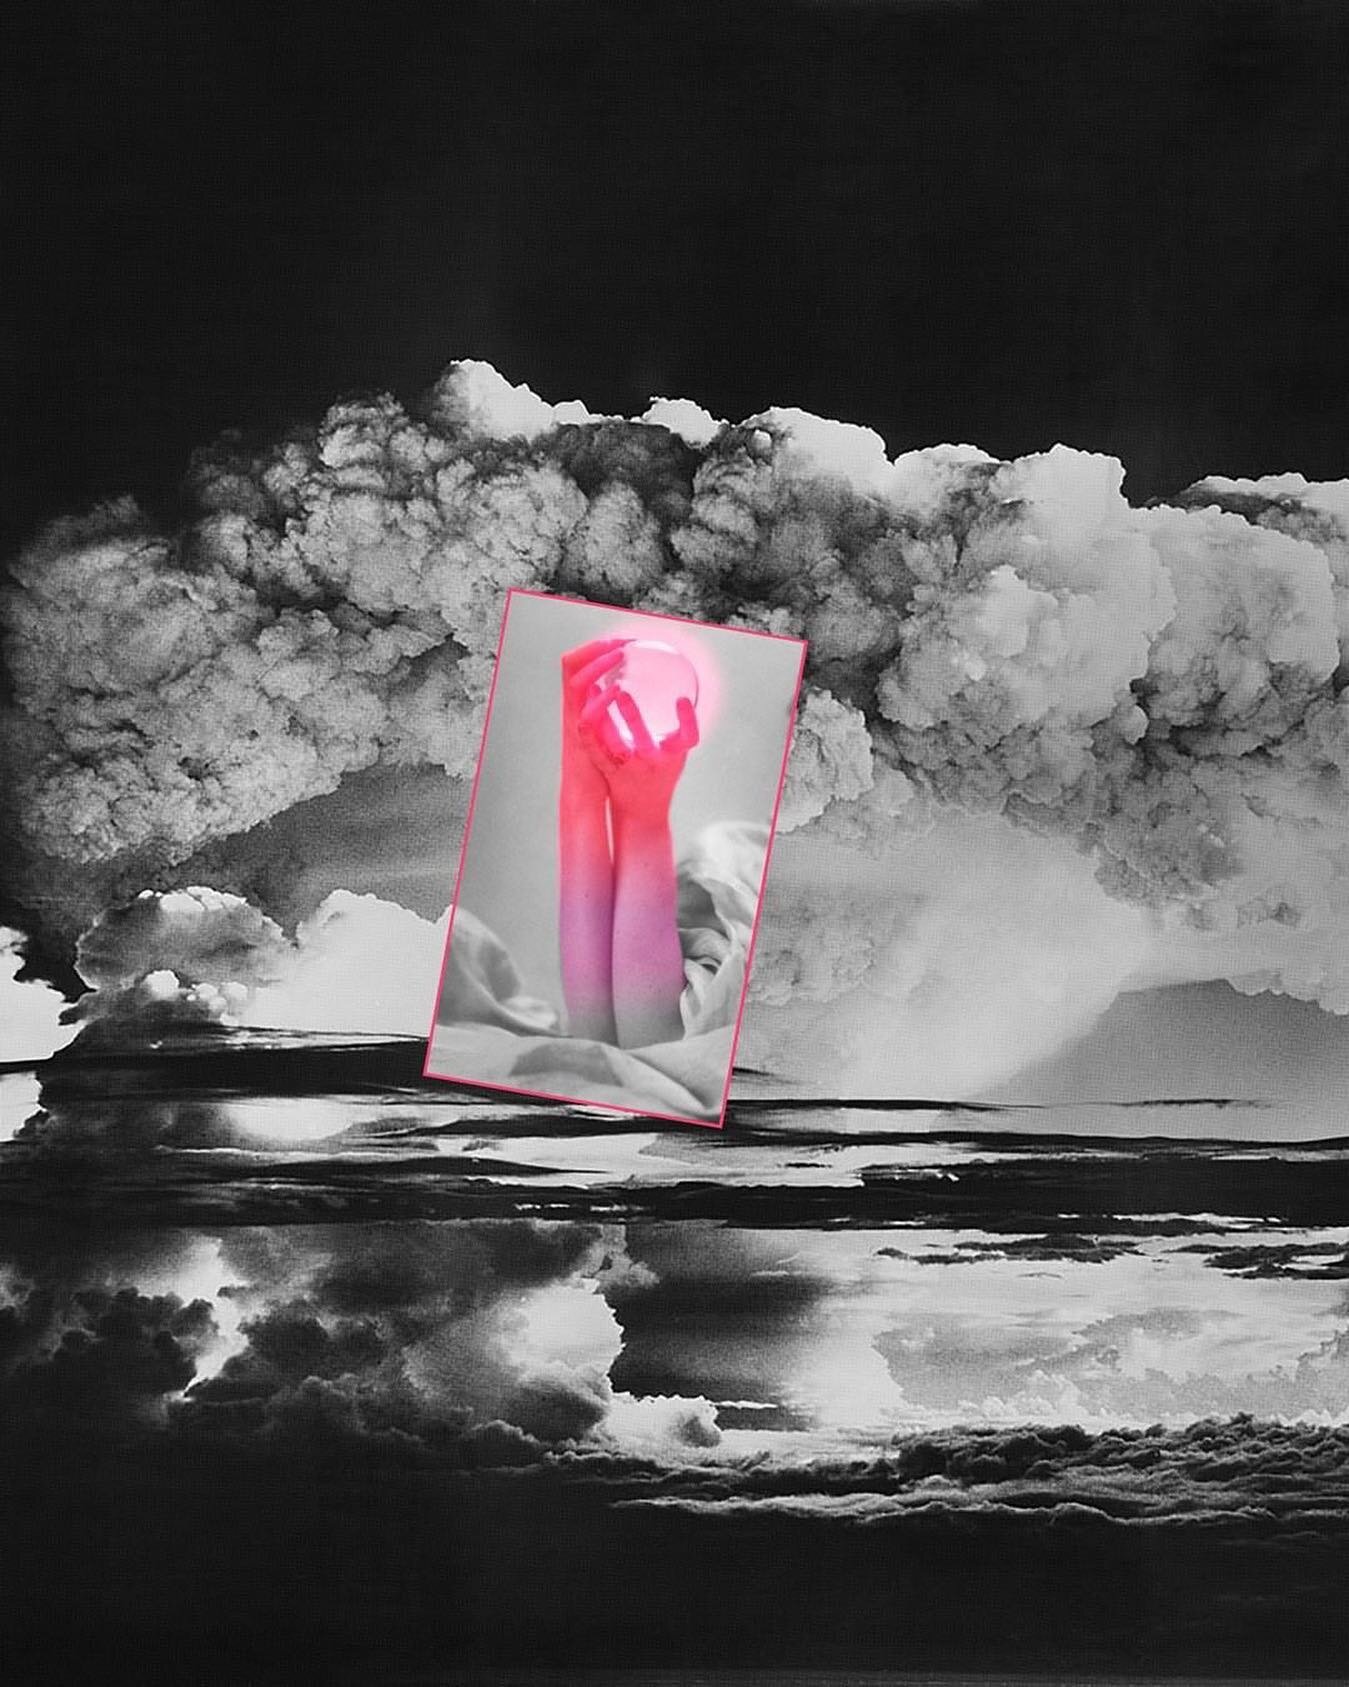 Join me and @nattynattynatnatnat as we discuss our collaborative project, O_Man! which uses collage as a tool for interrogating the history of photography and images in our current moment.

PCNW
Online Public Talk: April 5, 2022 | Tuesday 4:00 PST / 